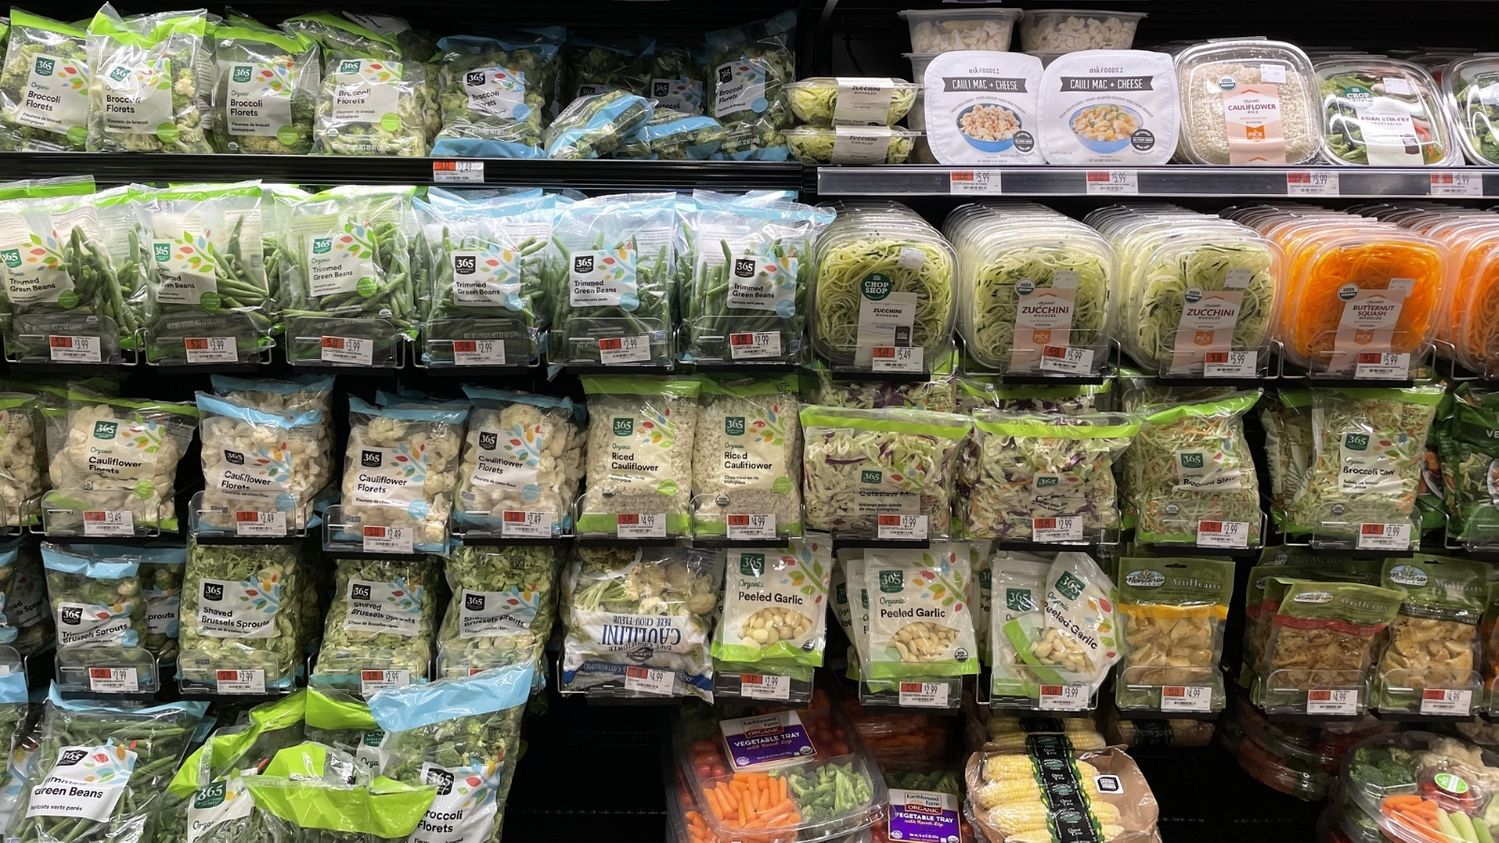 10 steps Whole Foods can immediately take to reduce single-use plastic